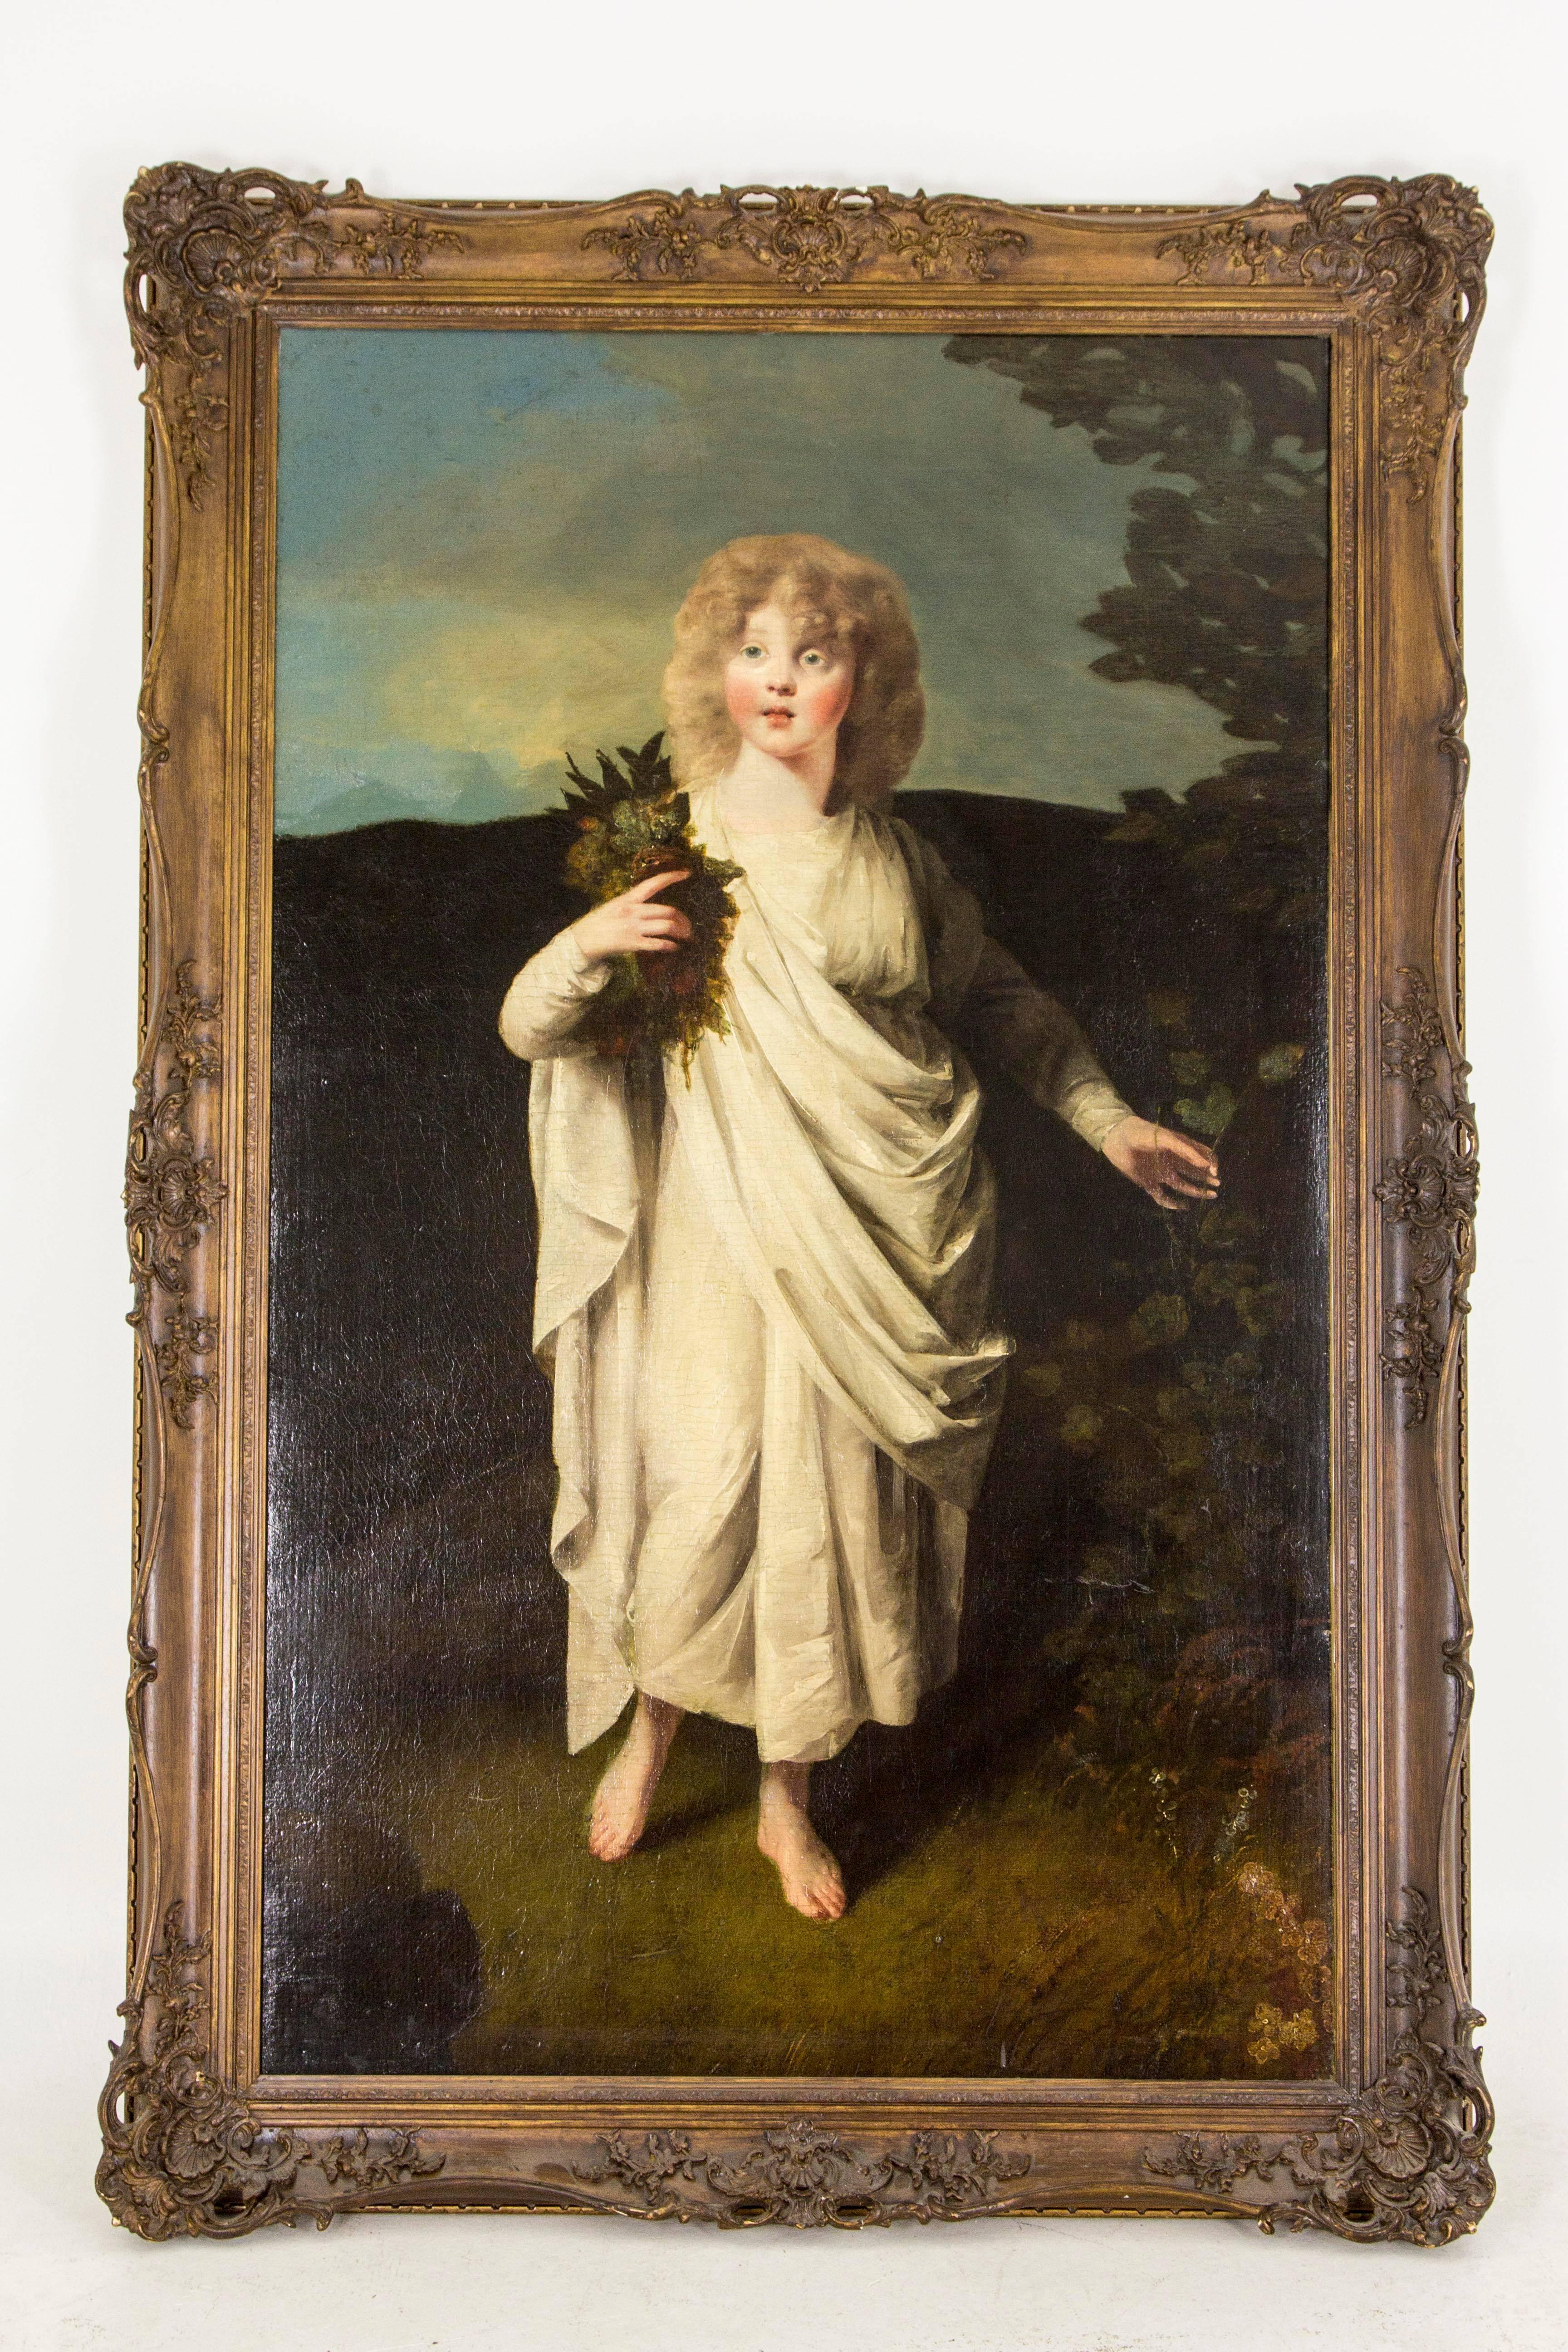 Scottish B639 Large 18th-Early 19th Century Portrait of a Young Girl in White